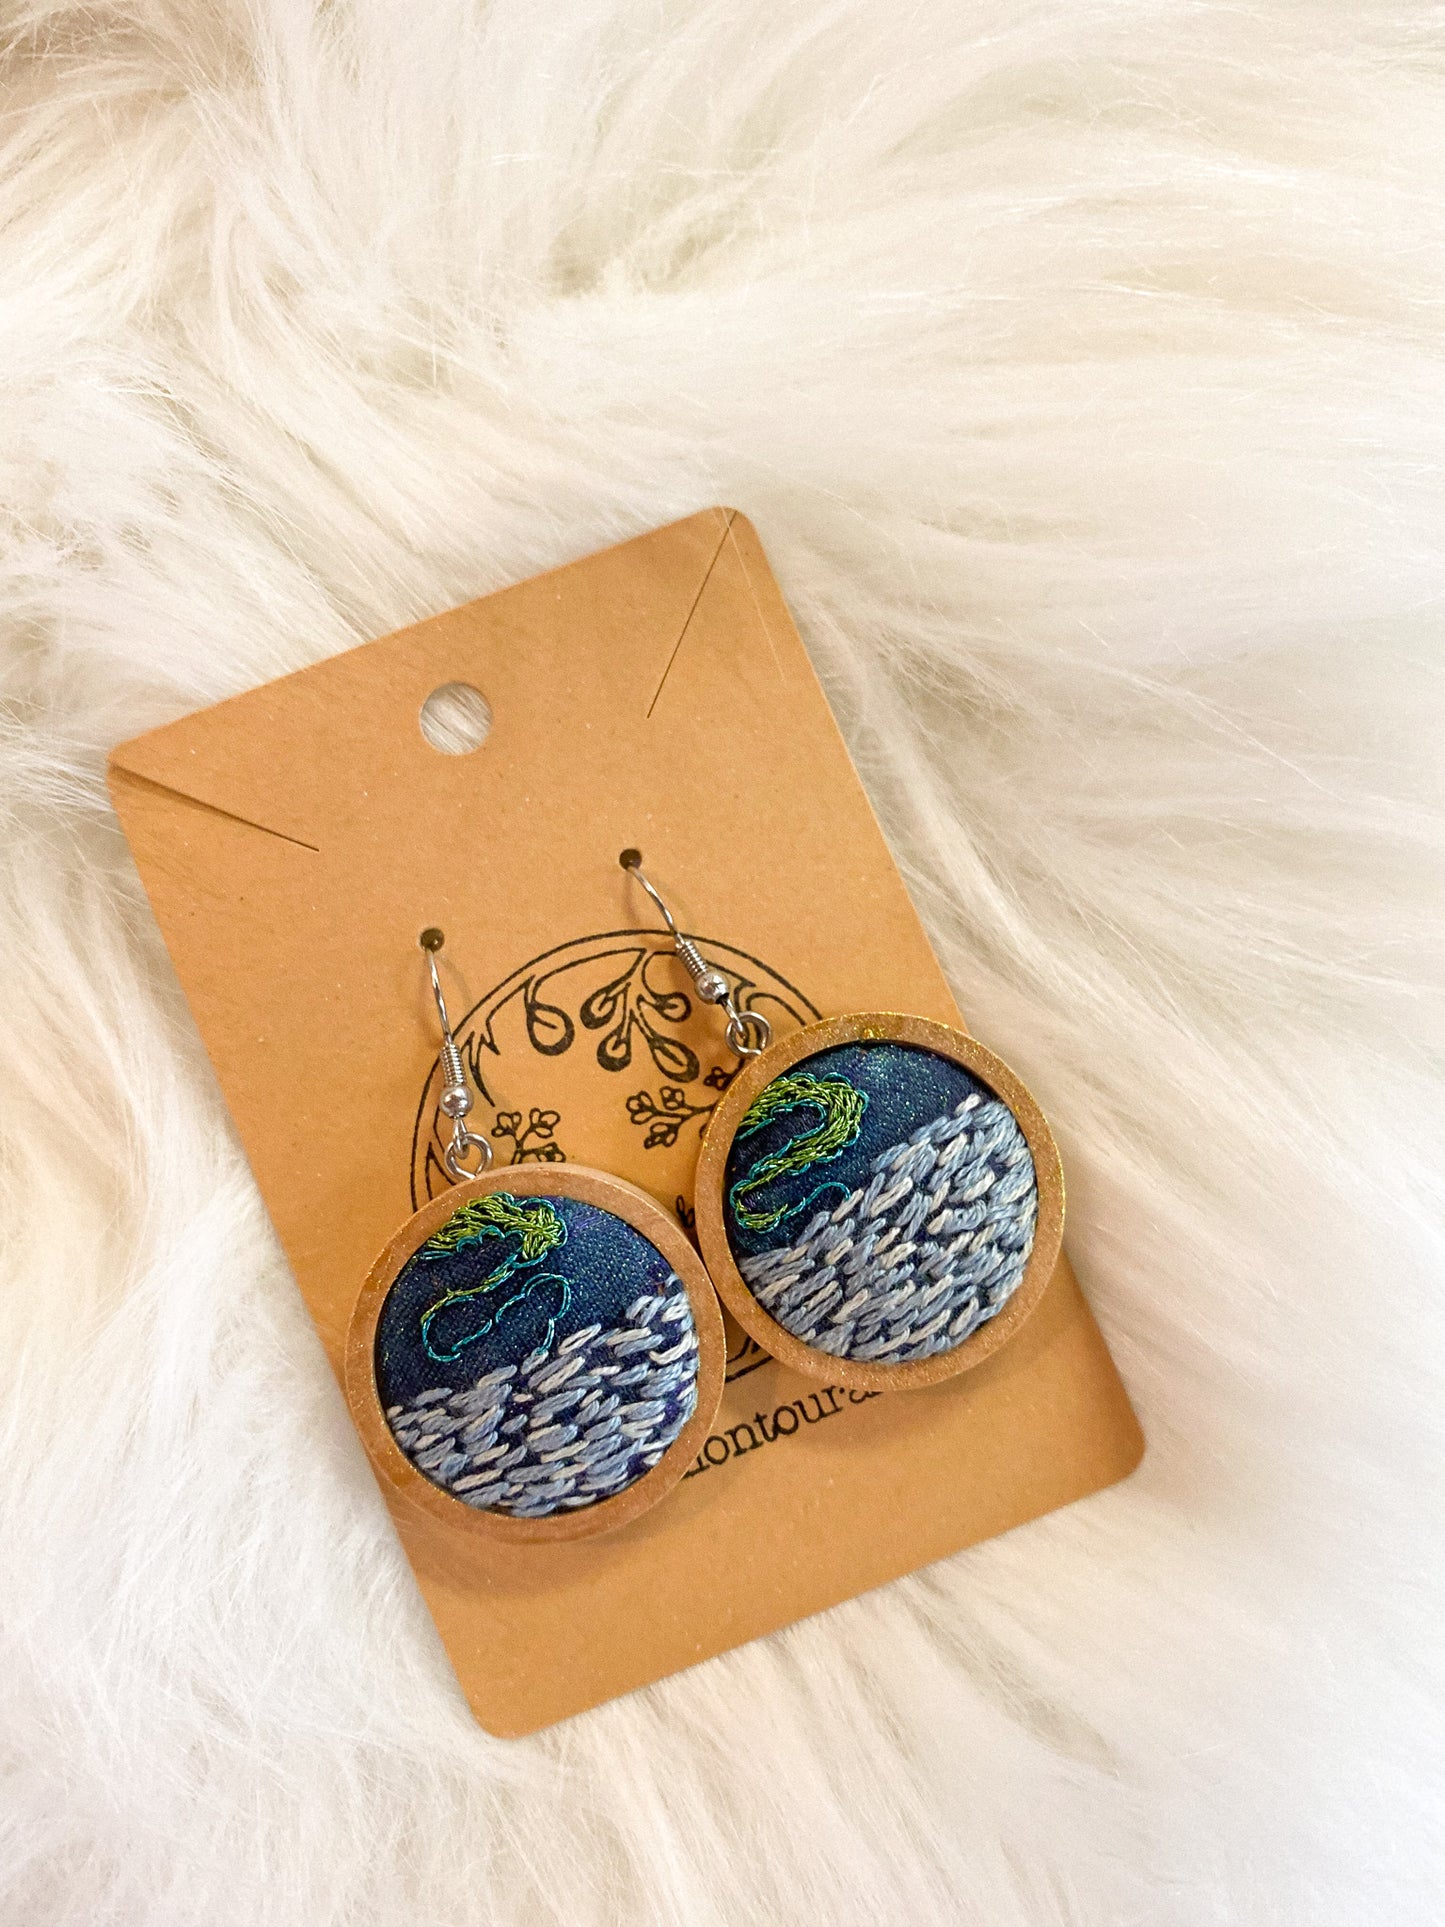 Aurora Over Waters Earrings by Brittany Montour